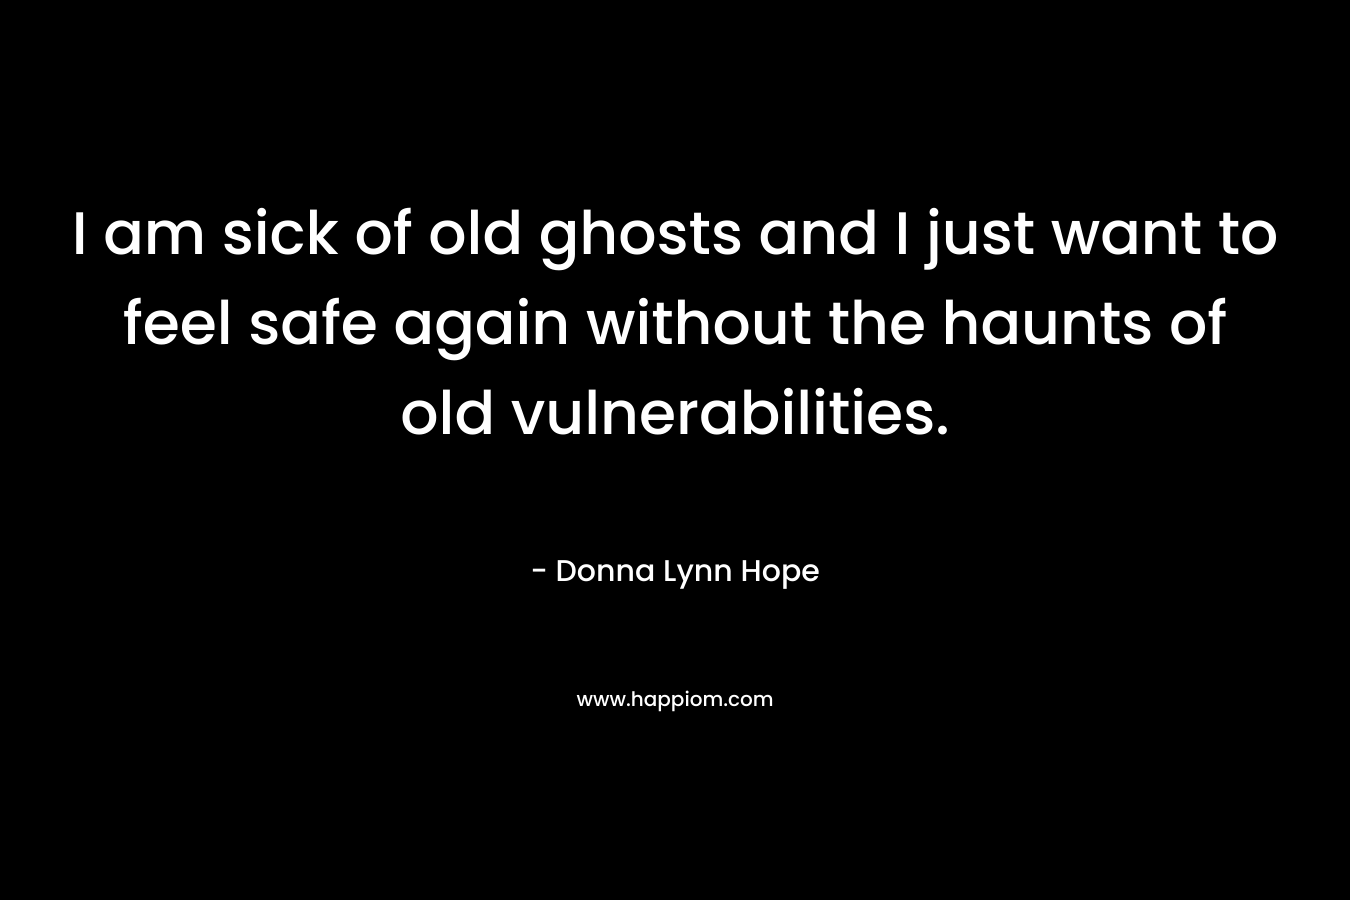 I am sick of old ghosts and I just want to feel safe again without the haunts of old vulnerabilities. – Donna Lynn Hope